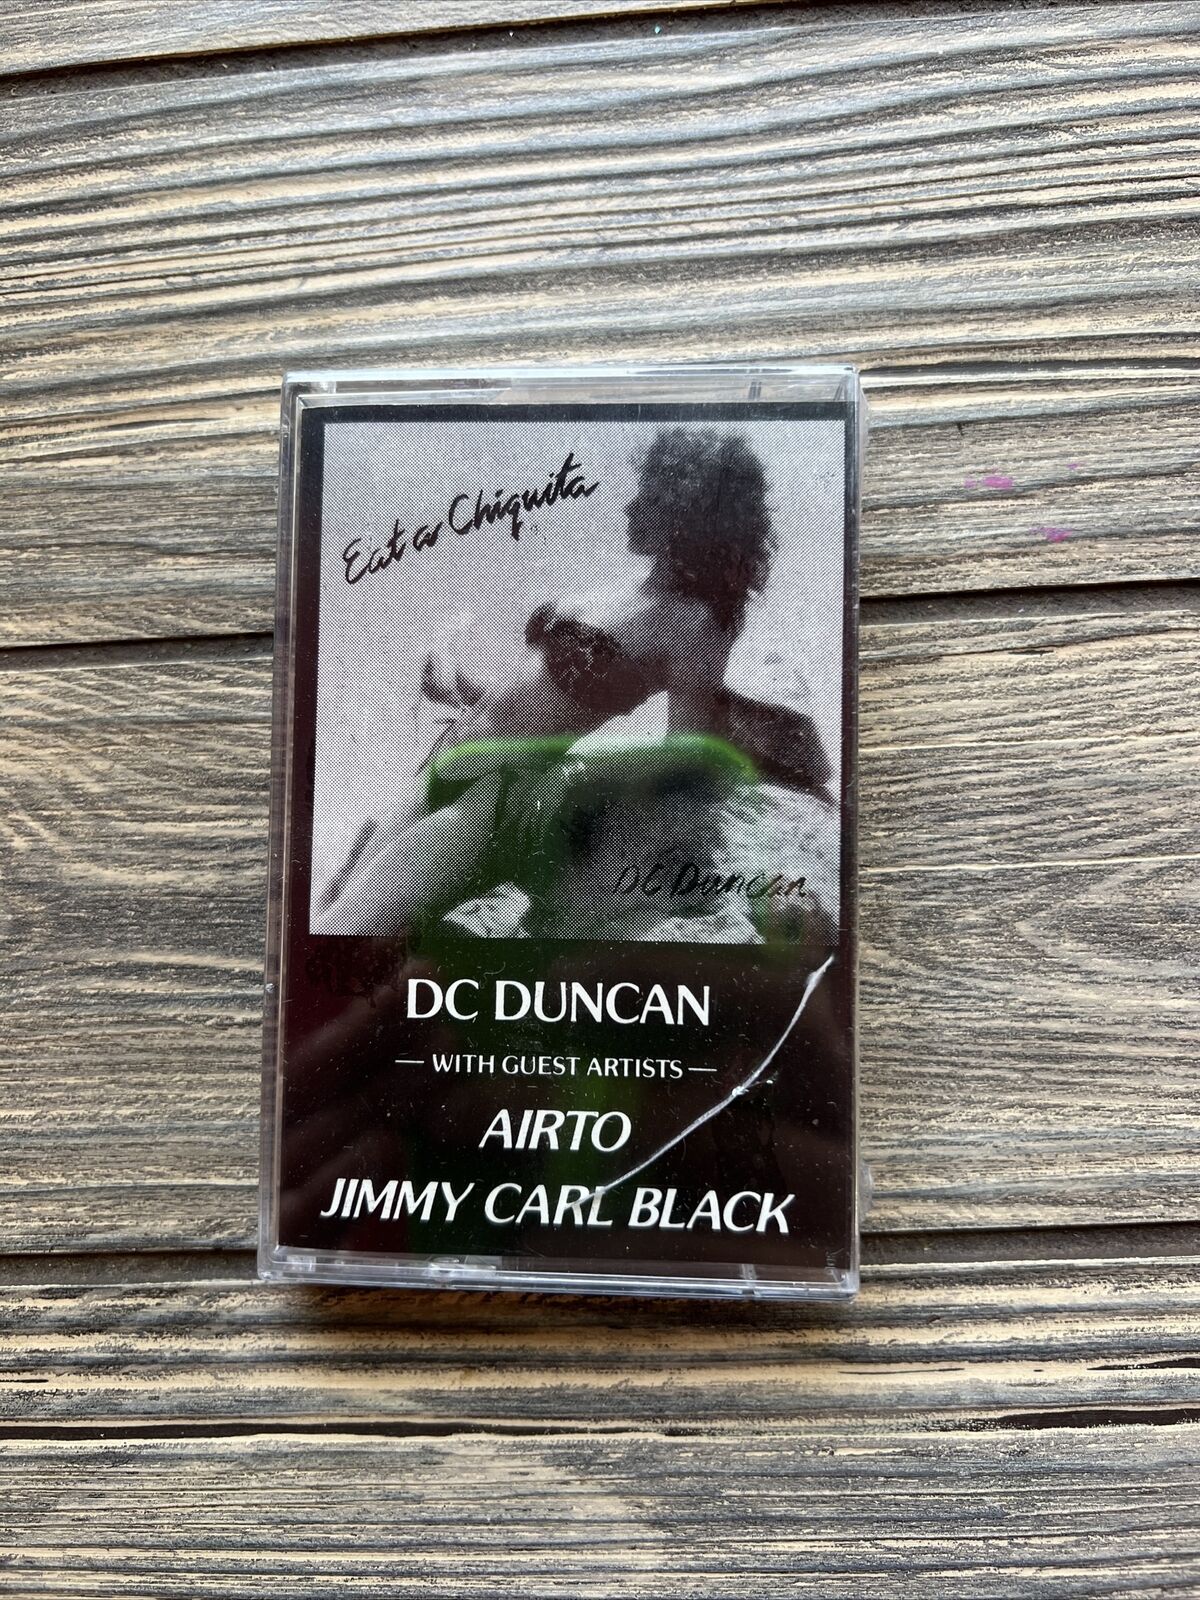 RARE HTF DC Duncan With Guest Artists Airto Jimmy Carl Black Eat A Chiquita